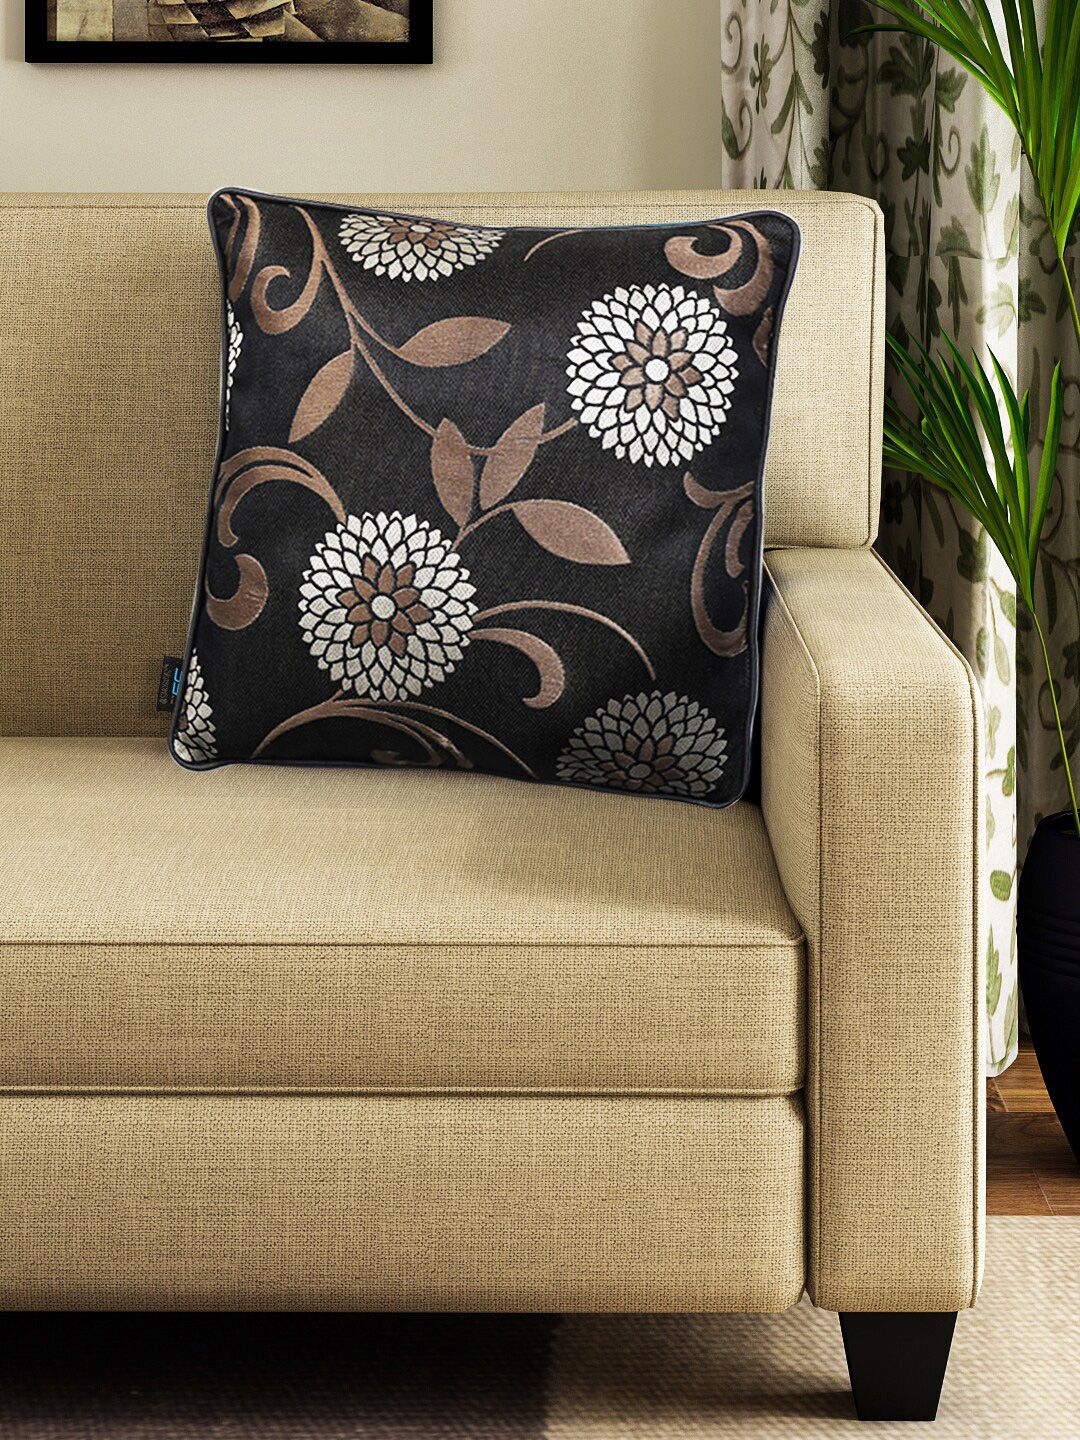 S9home by Seasons Black & White Floral Square Cushion Covers Price in India